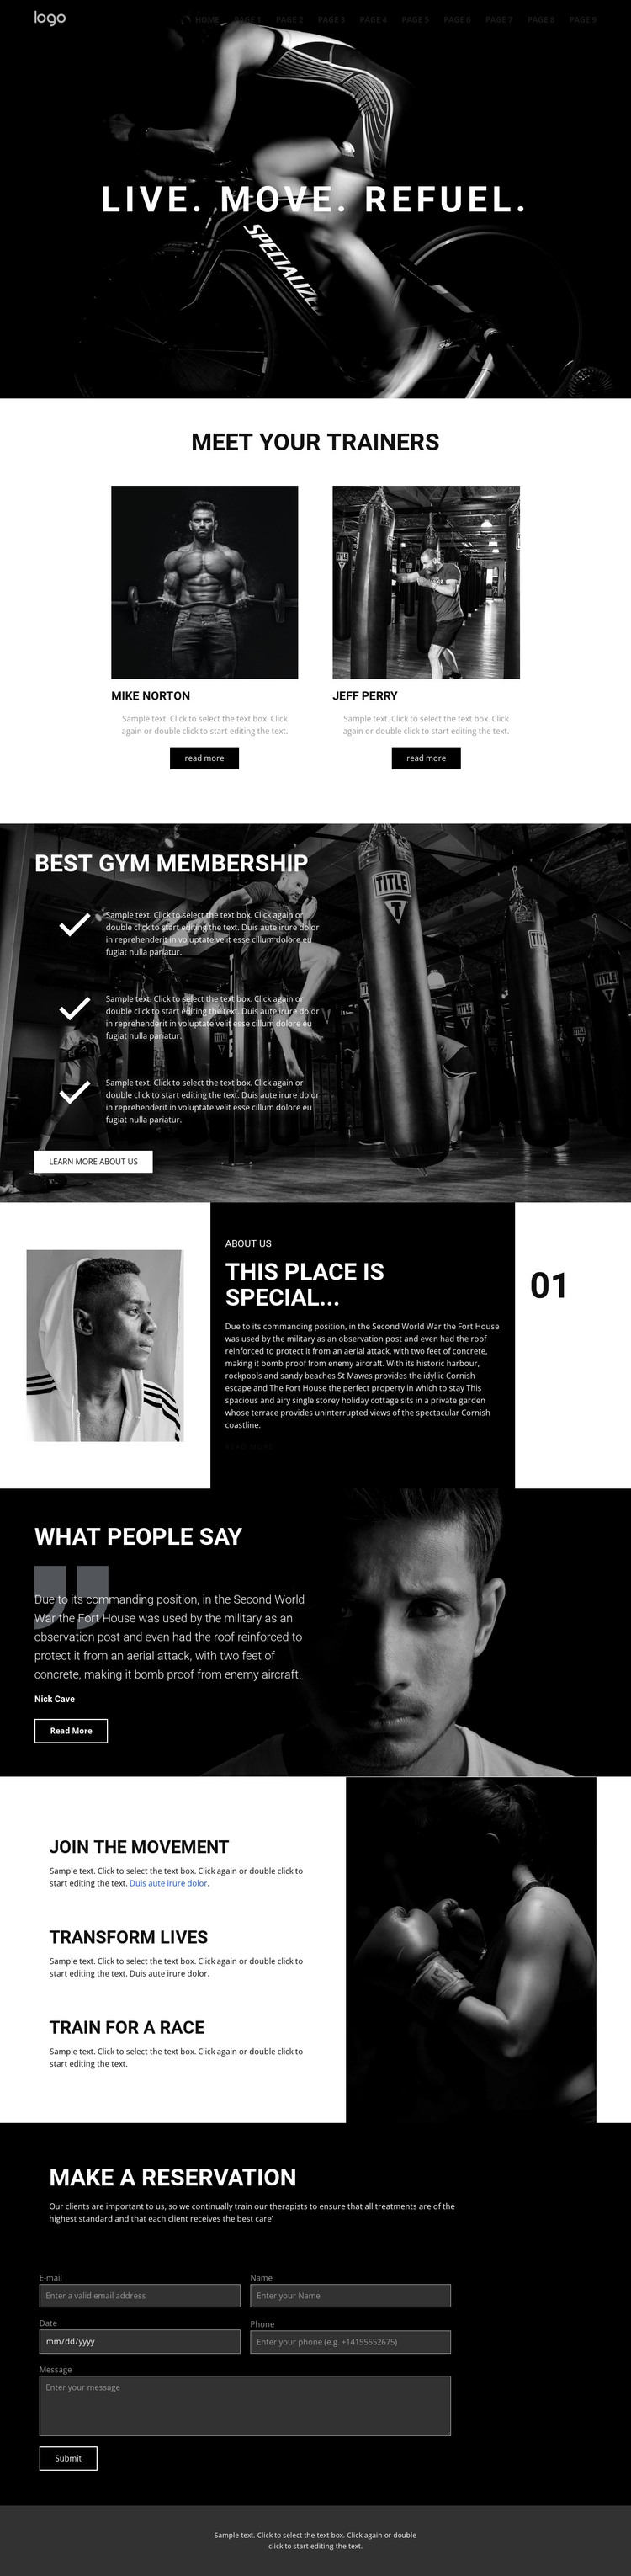 Refuel at power gym HTML Template